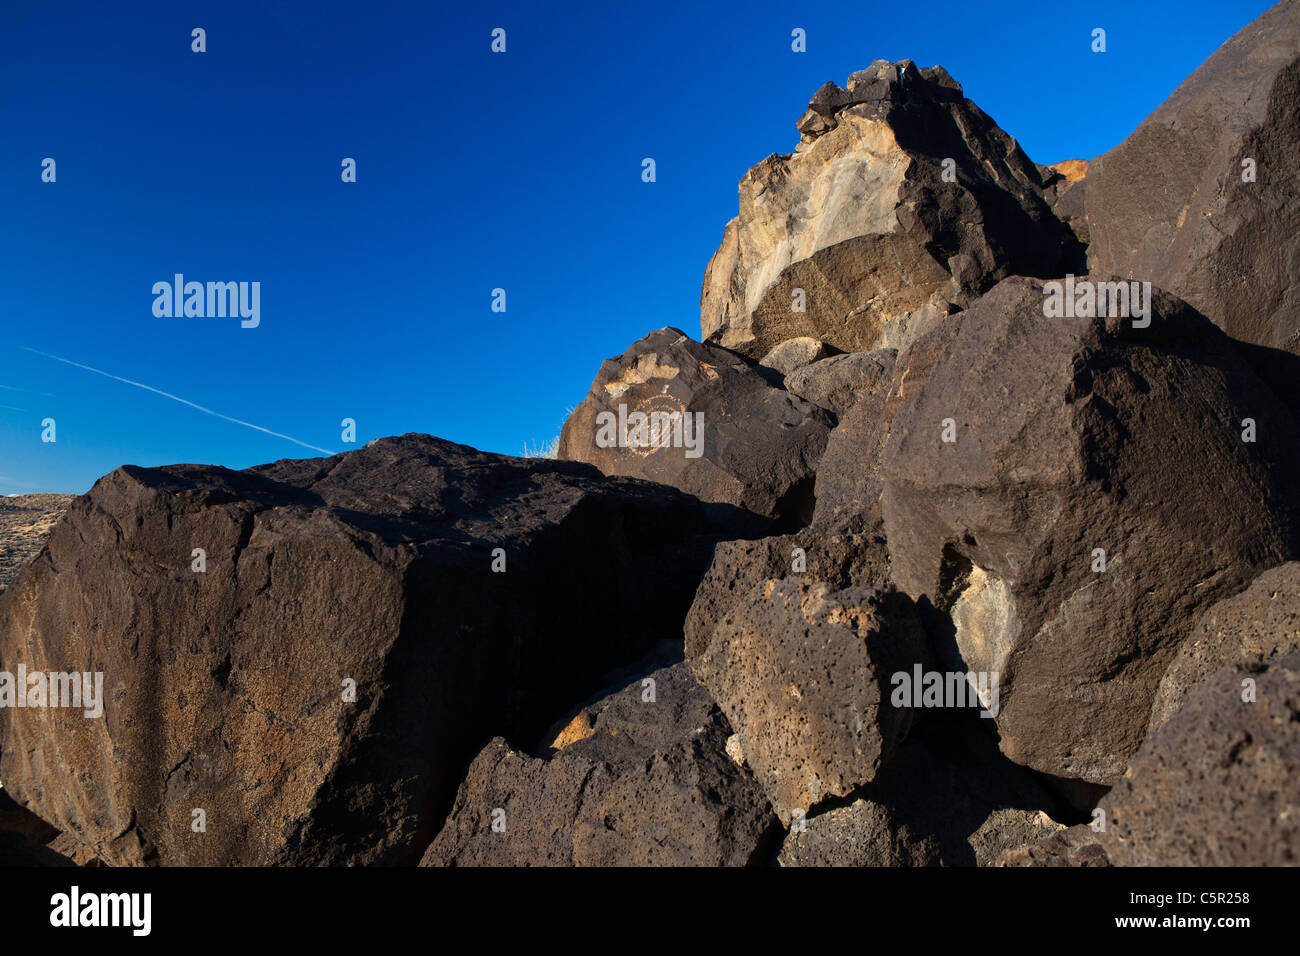 Petroglyph on ancient volcanic rock, Petroglyph National Monument, Albuquerque, New Mexico, United States of America Stock Photo